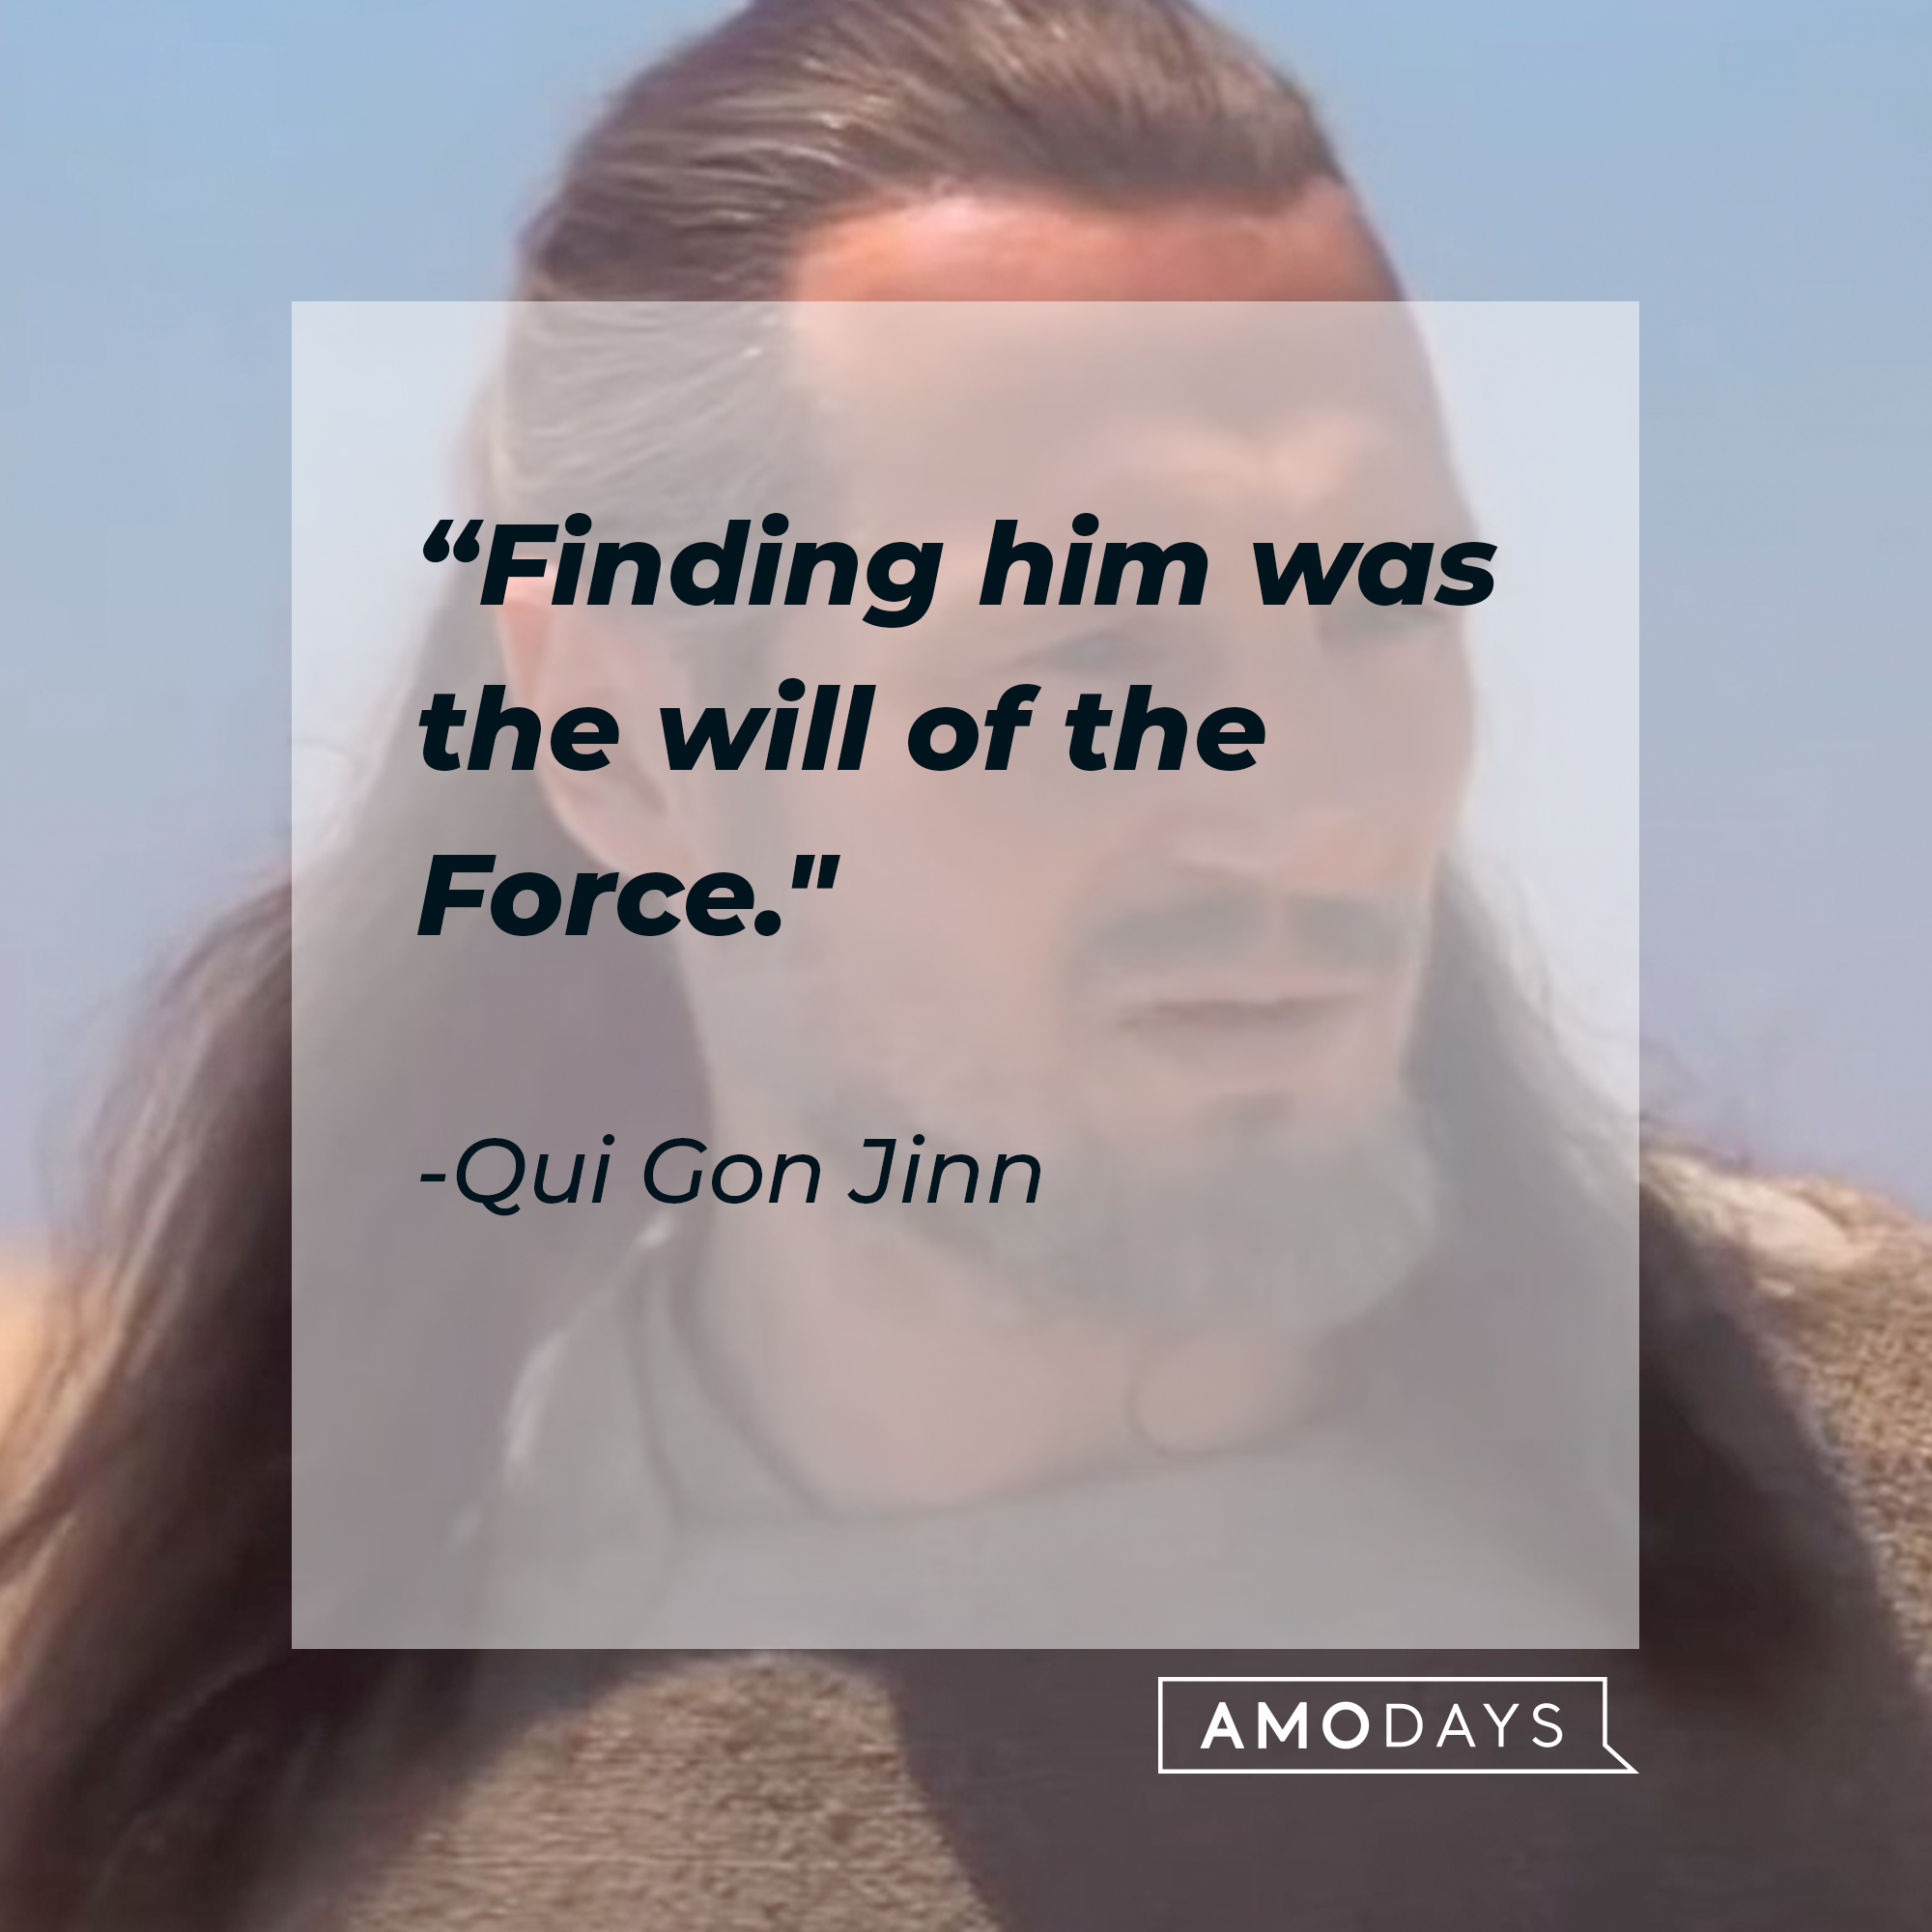 A picture of Qui Gon Jinn with a quote by him: “Finding him was the will of the Force." | Source: facebook.com/StarWars